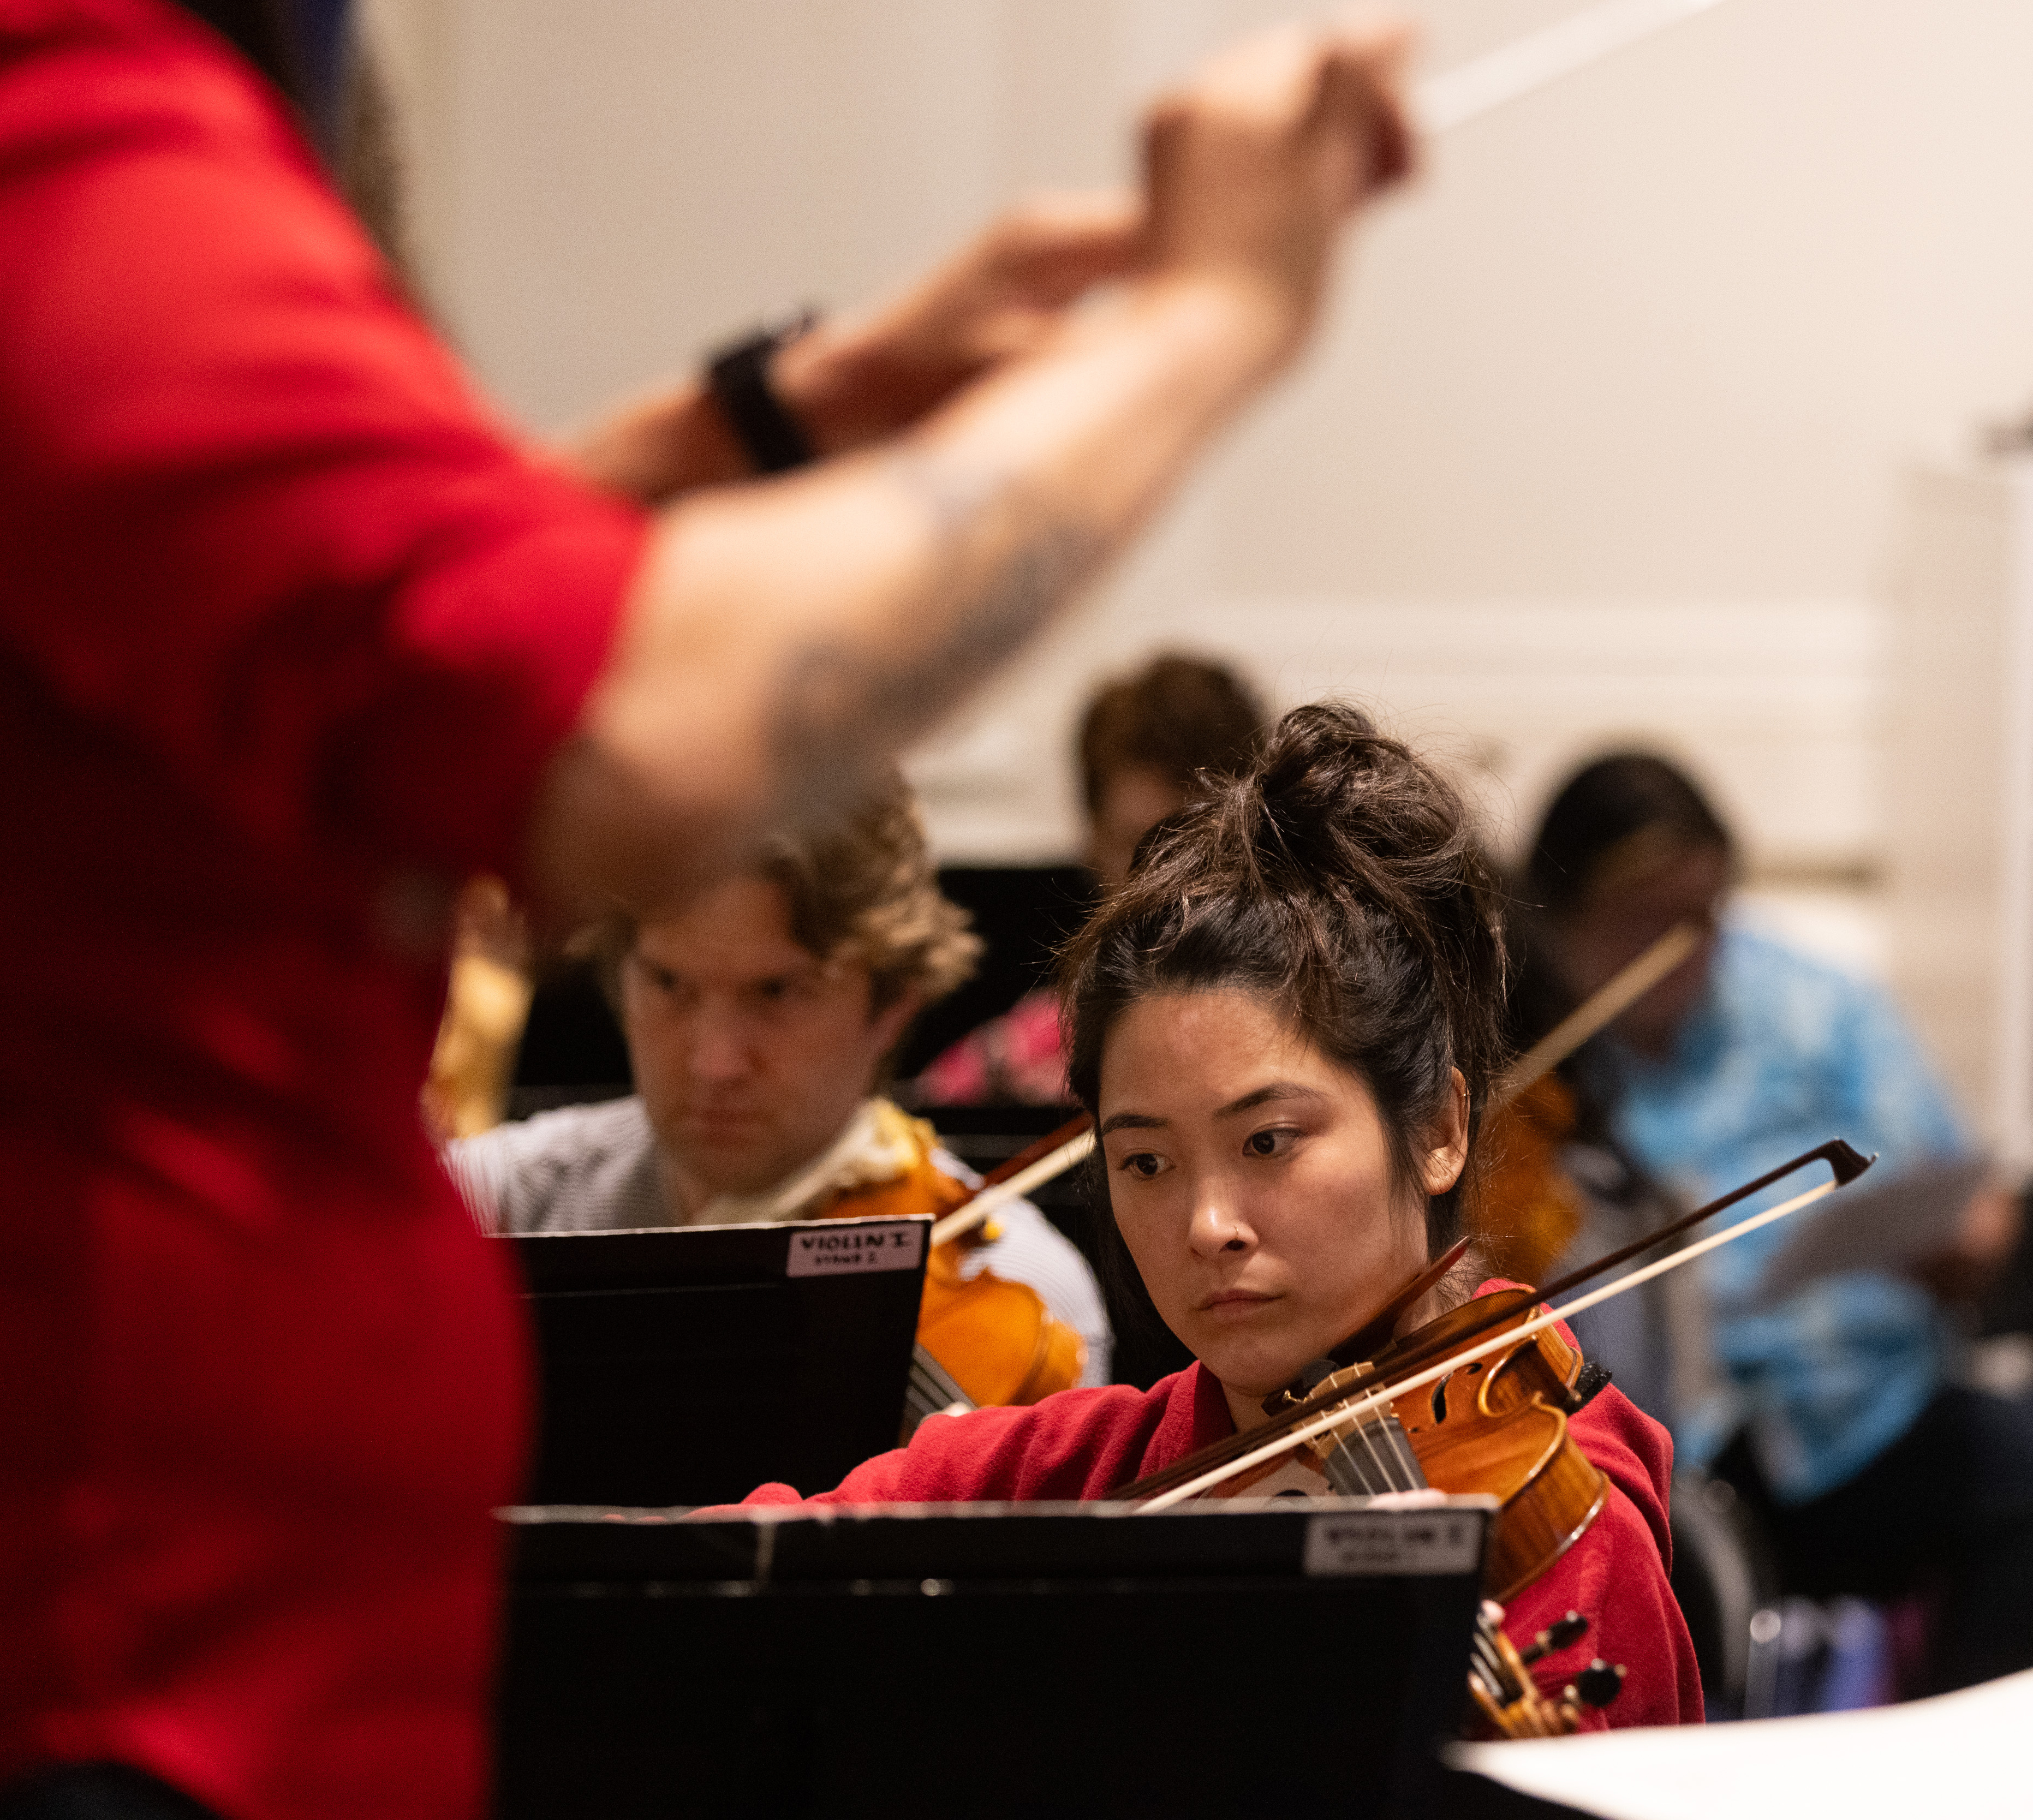 A focused woman plays the violin in an orchestra rehearsal, with a blurred conductor's arm in the foreground and other musicians in the background.